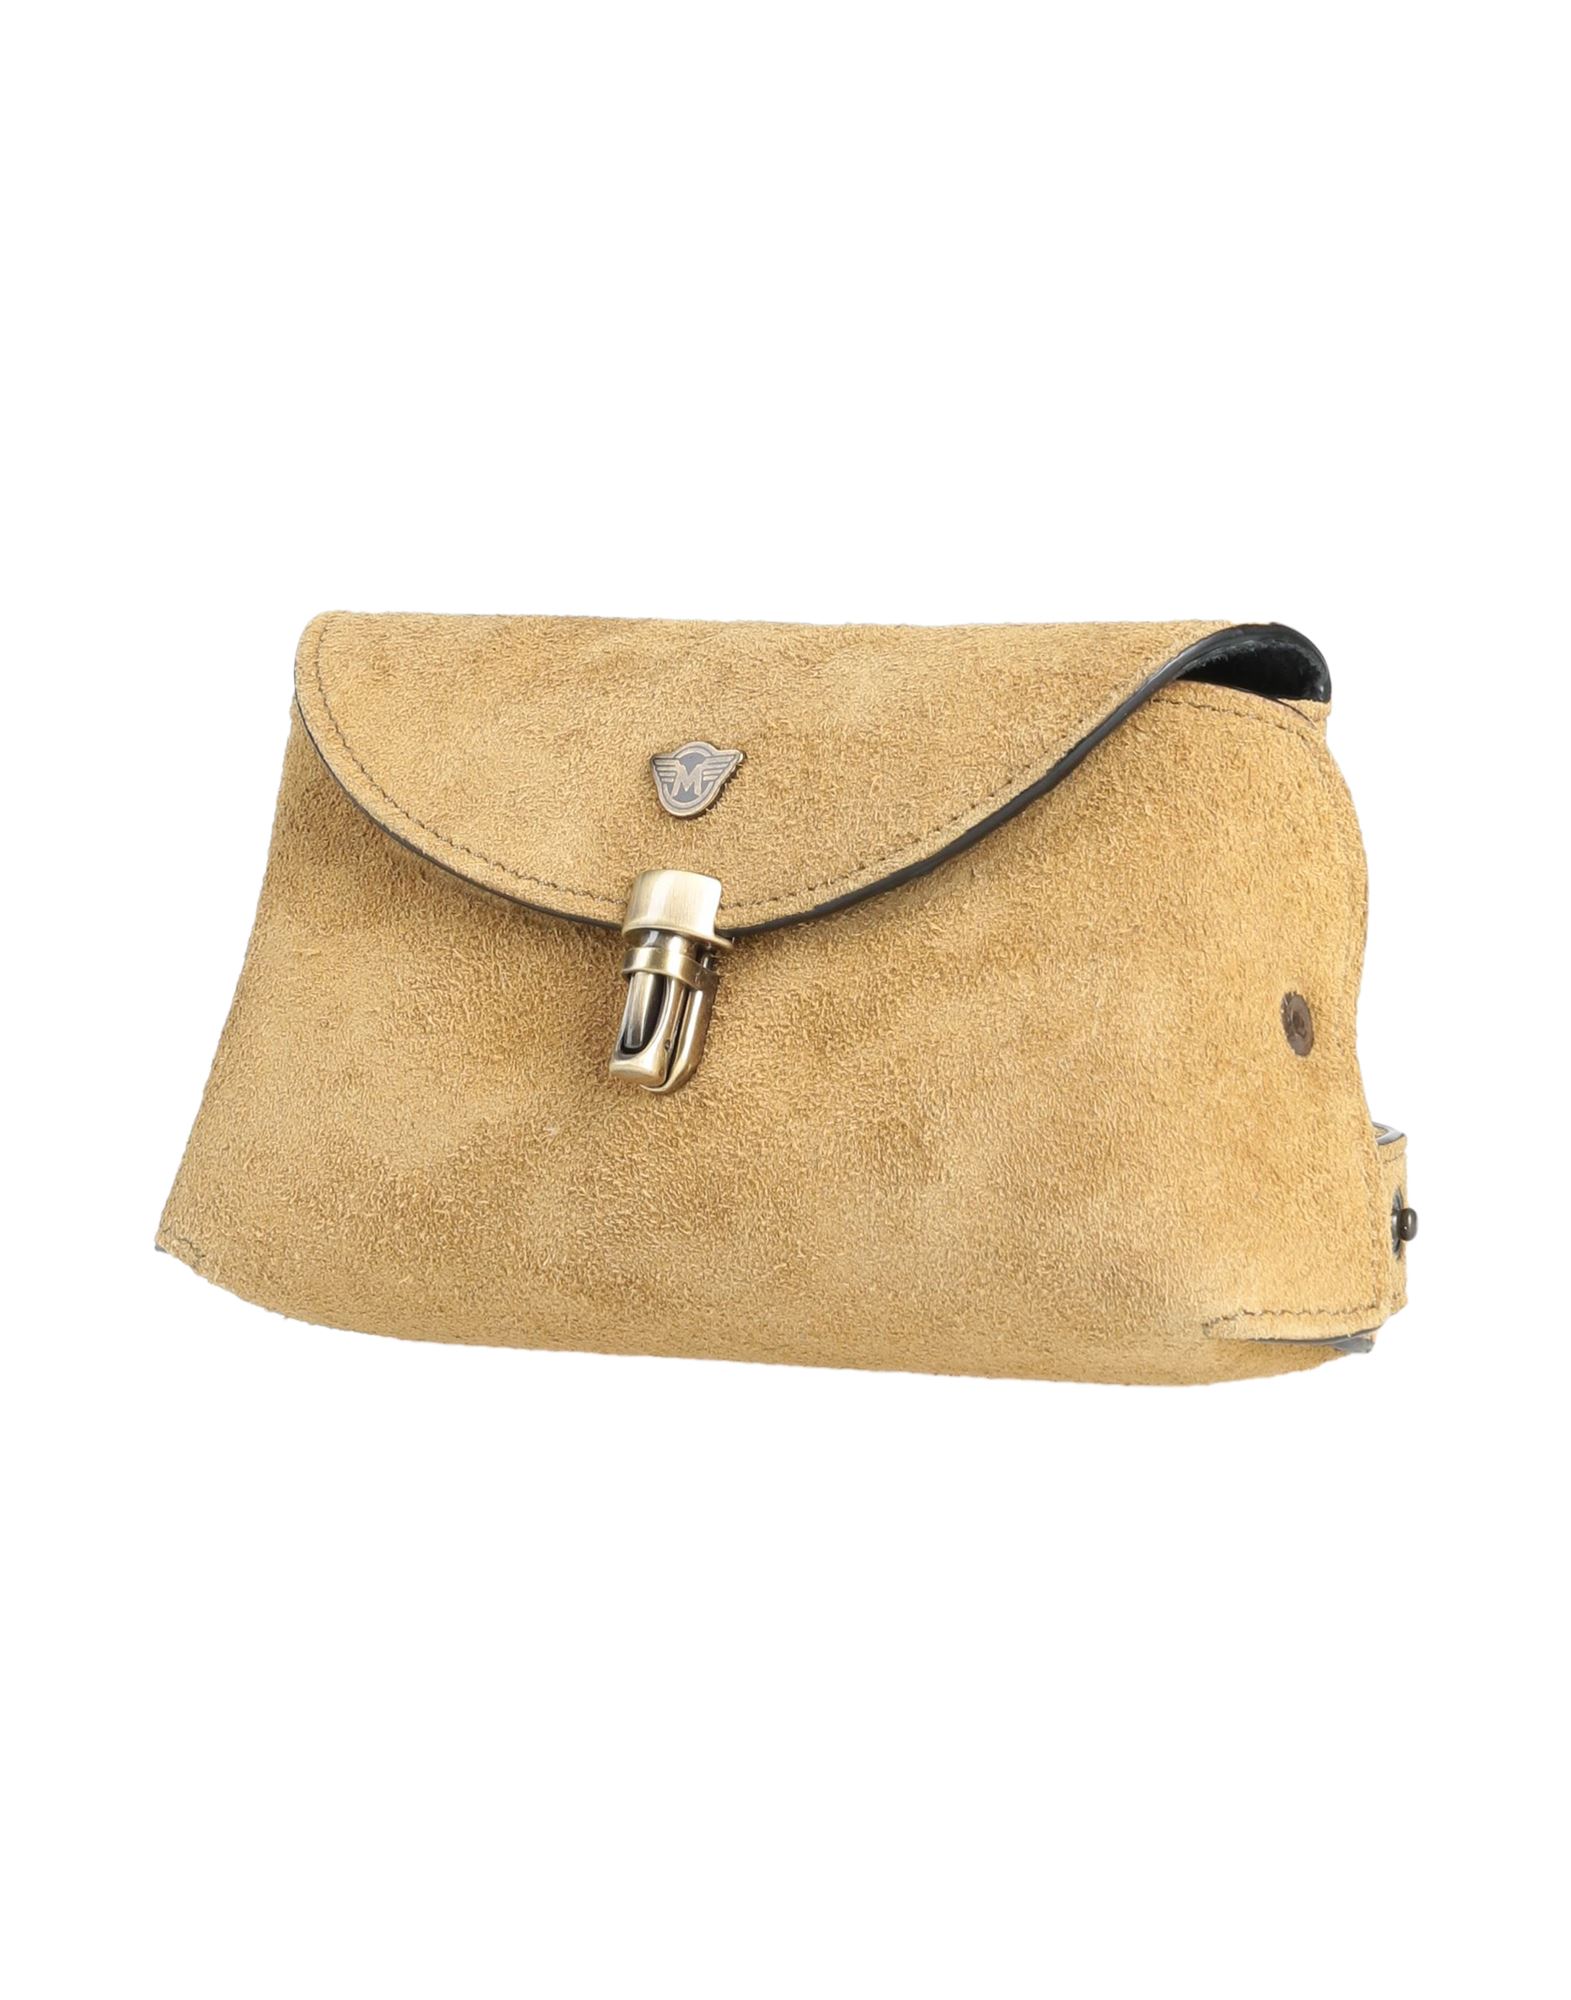 Matchless Bum Bags In Beige